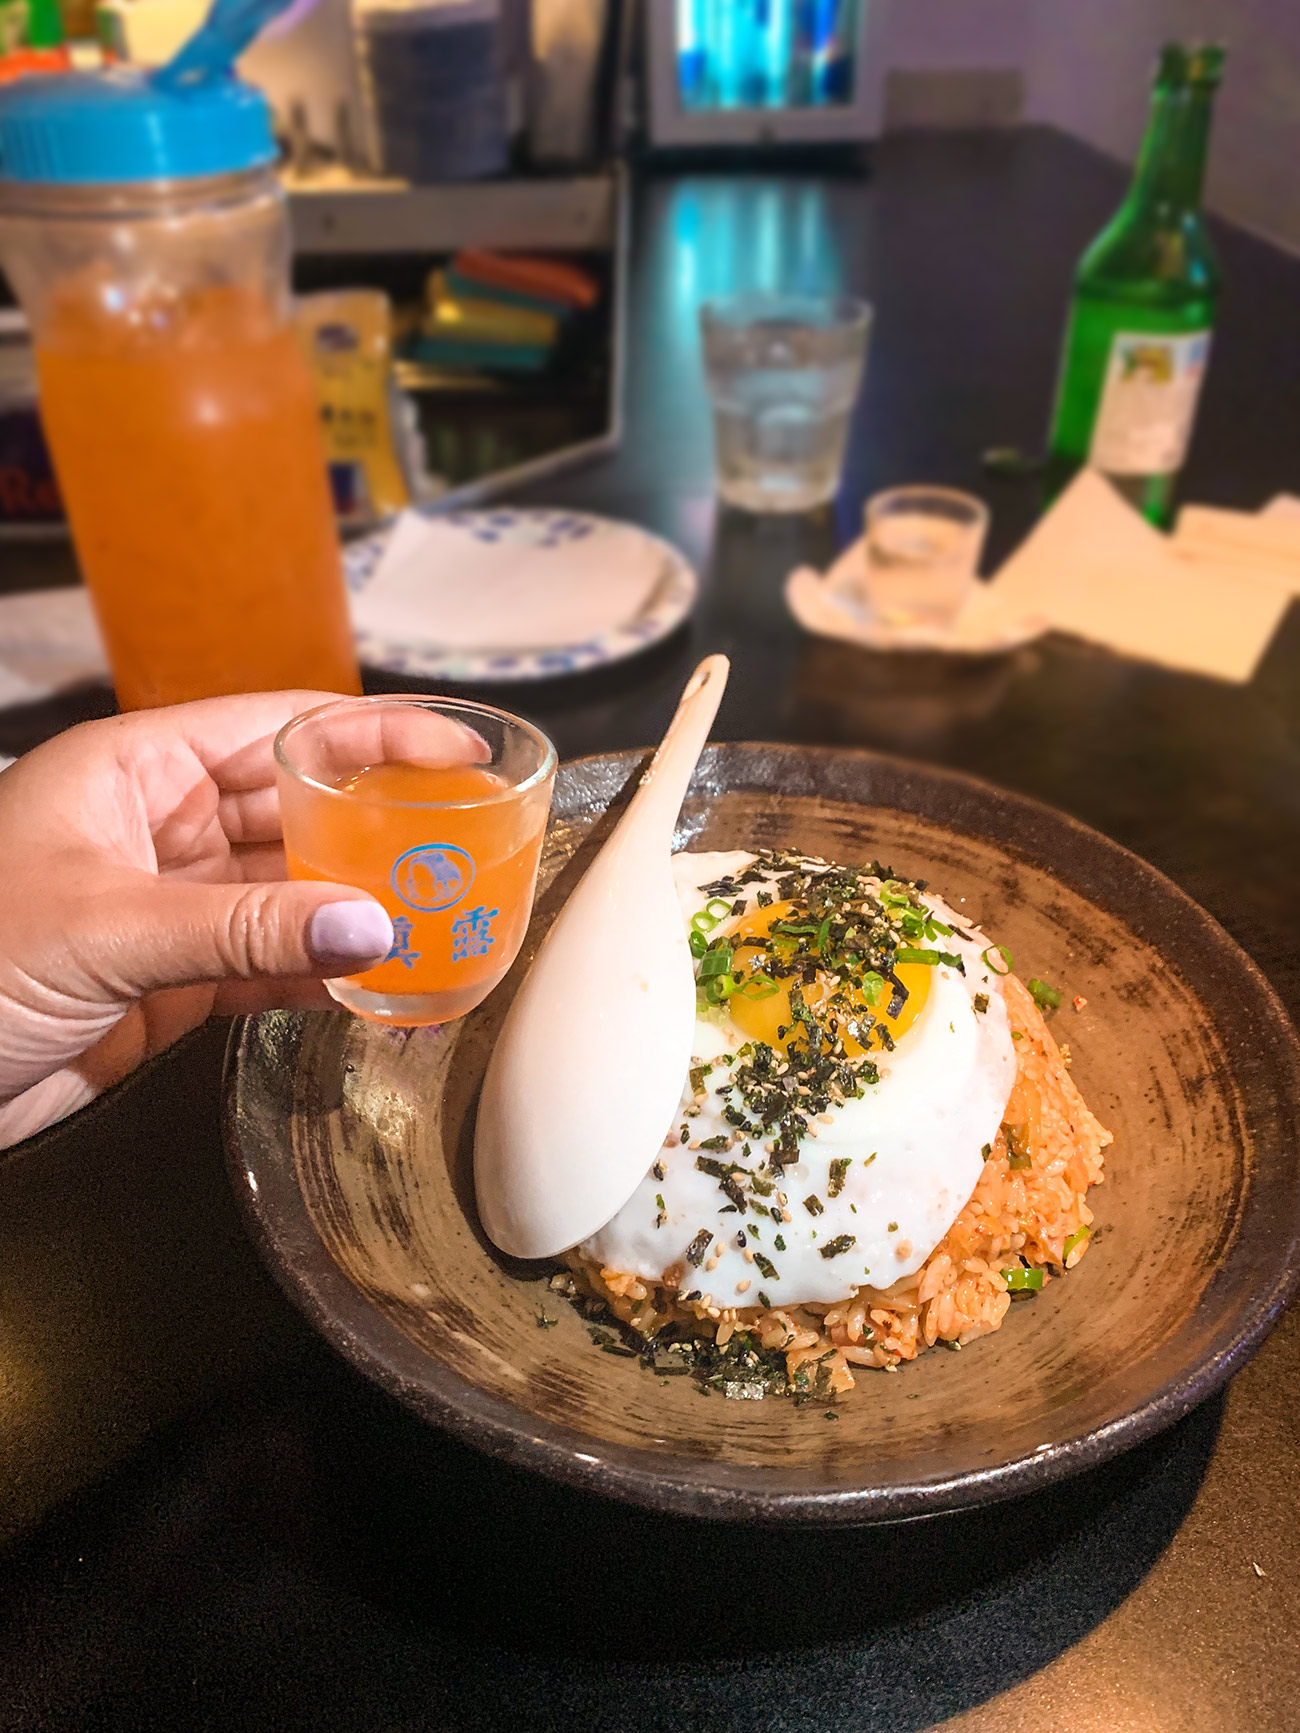 popular place to eat in honolulu - Cafe Duck Butt